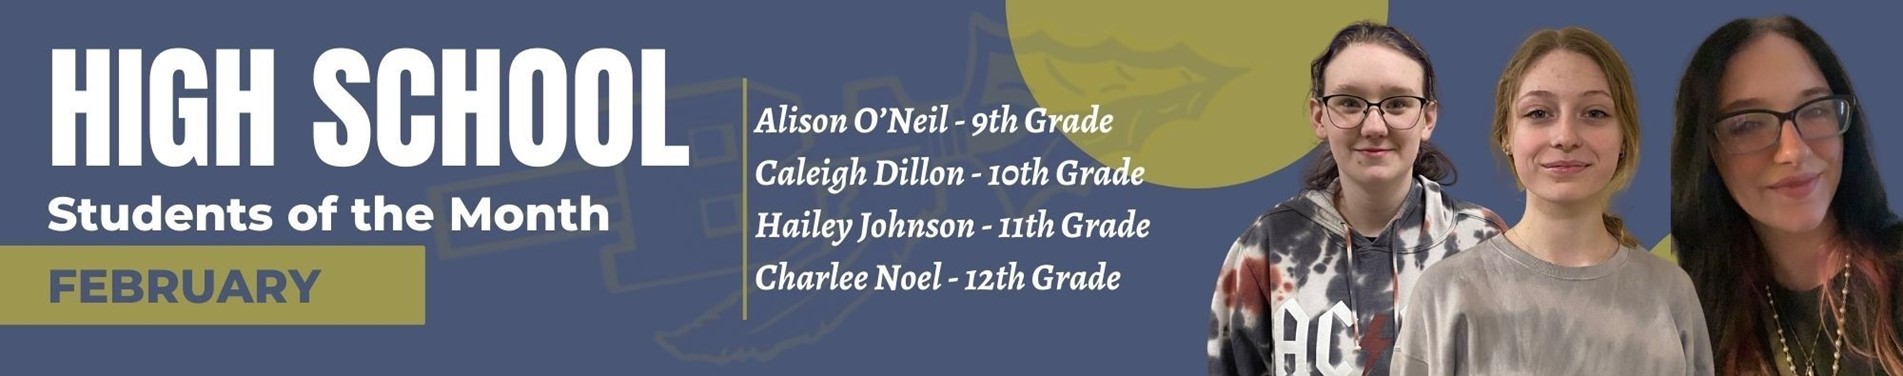 BHS Students of the Month - February (Alison, Caleigh, Hailey, Charlee)